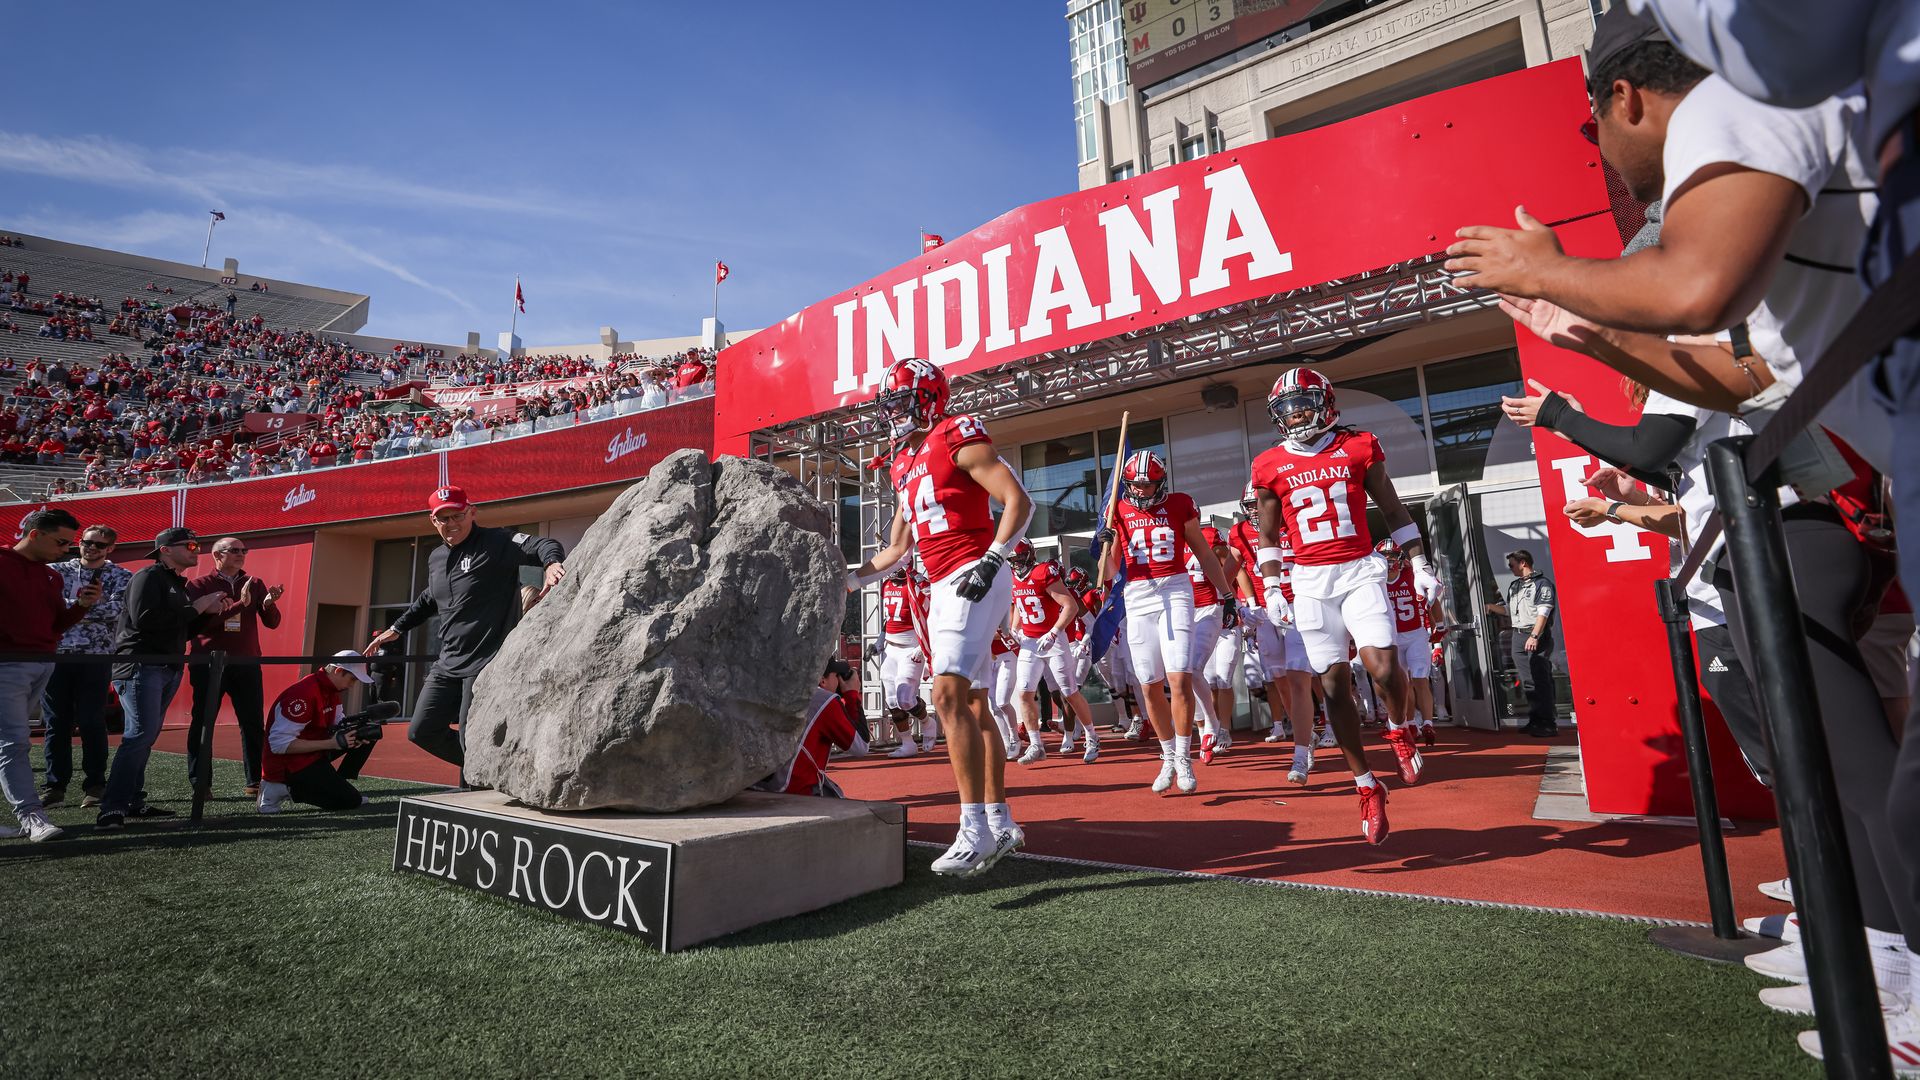 The Indiana football team walking out onto the field in front of a rock 